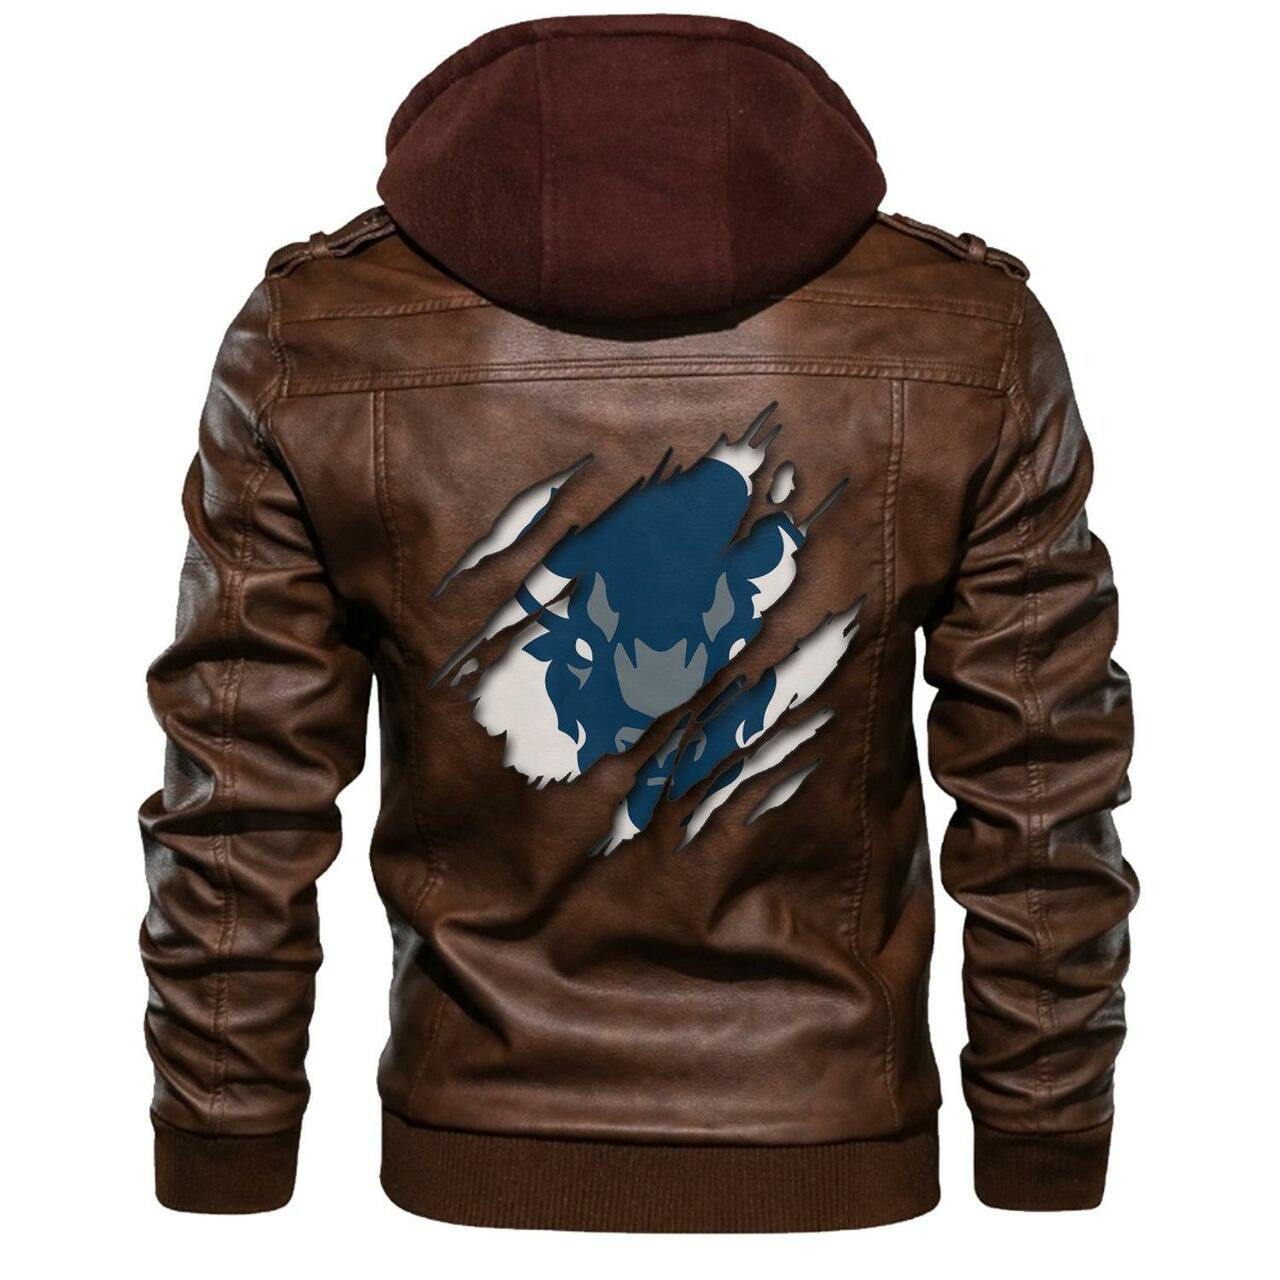 To get a great look, consider purchasing This New Leather Jacket 58